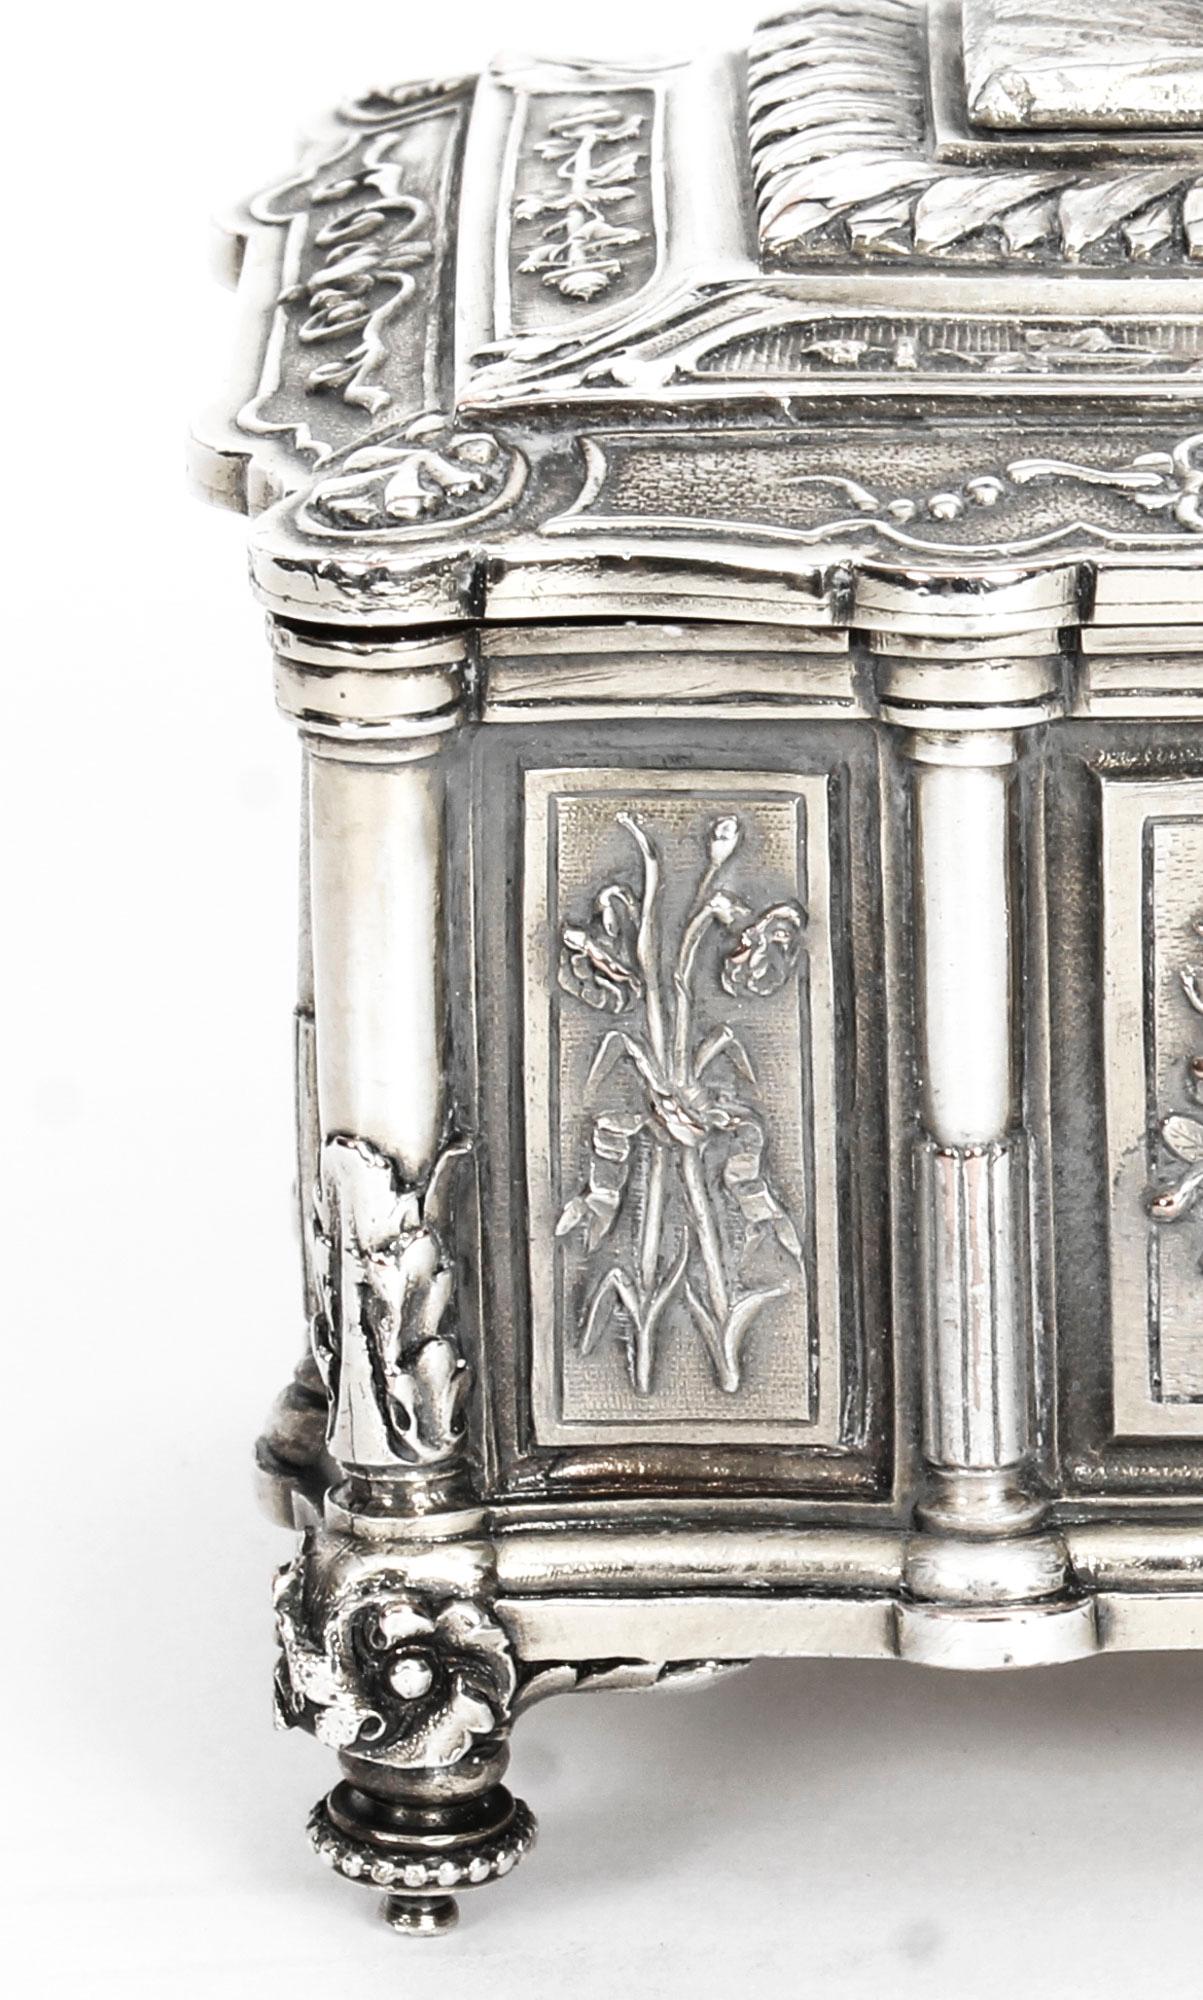 Late 19th Century Antique Victorian Silver Plated Casket by Mappin & Webb, 19th Century